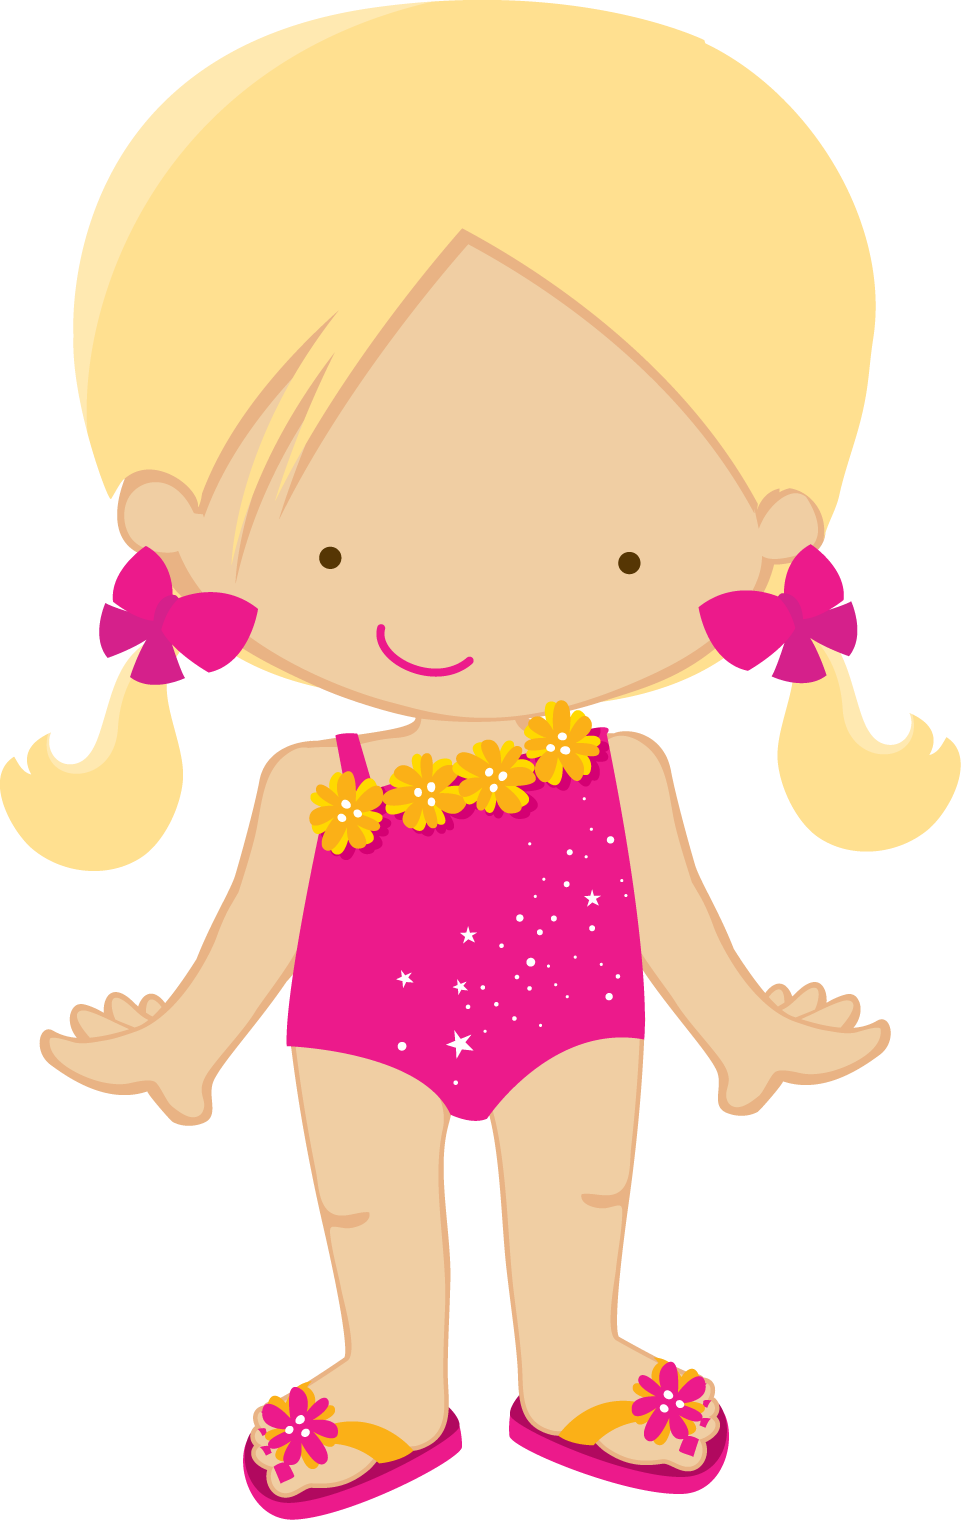 Zwd umbrella poolgirl png. Clothespin clipart pink